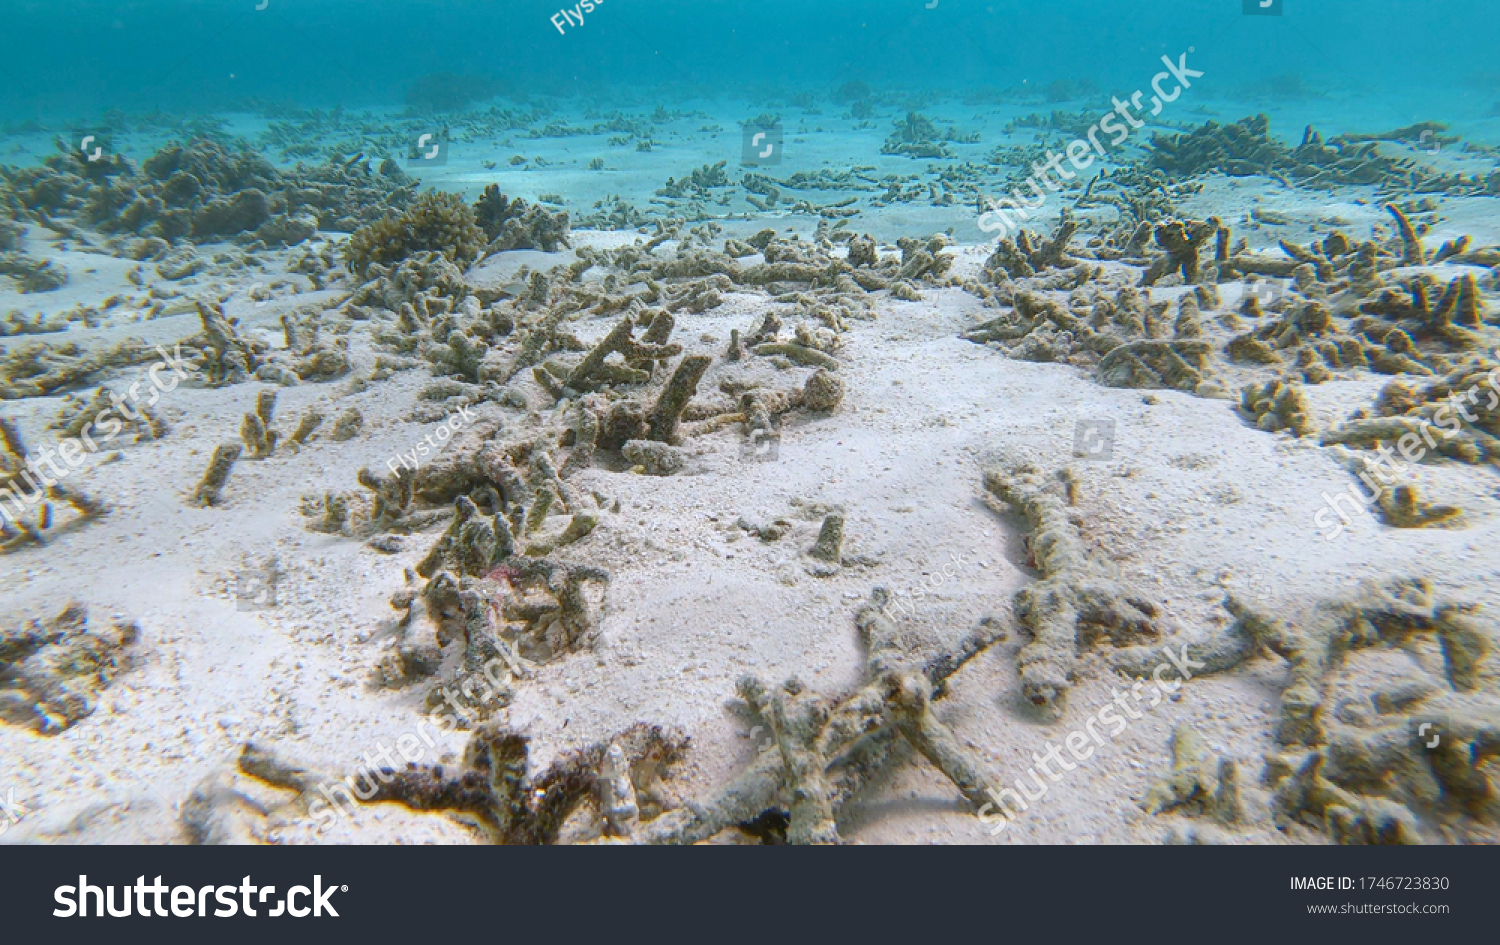 UNDERWATER, CLOSE UP: Global warming is damaging the once lush tropical marine life in Asia. Sad view of a devastated bleached exotic coral reef in the Maldives. Dead coral reef near Himmafushi. #1746723830